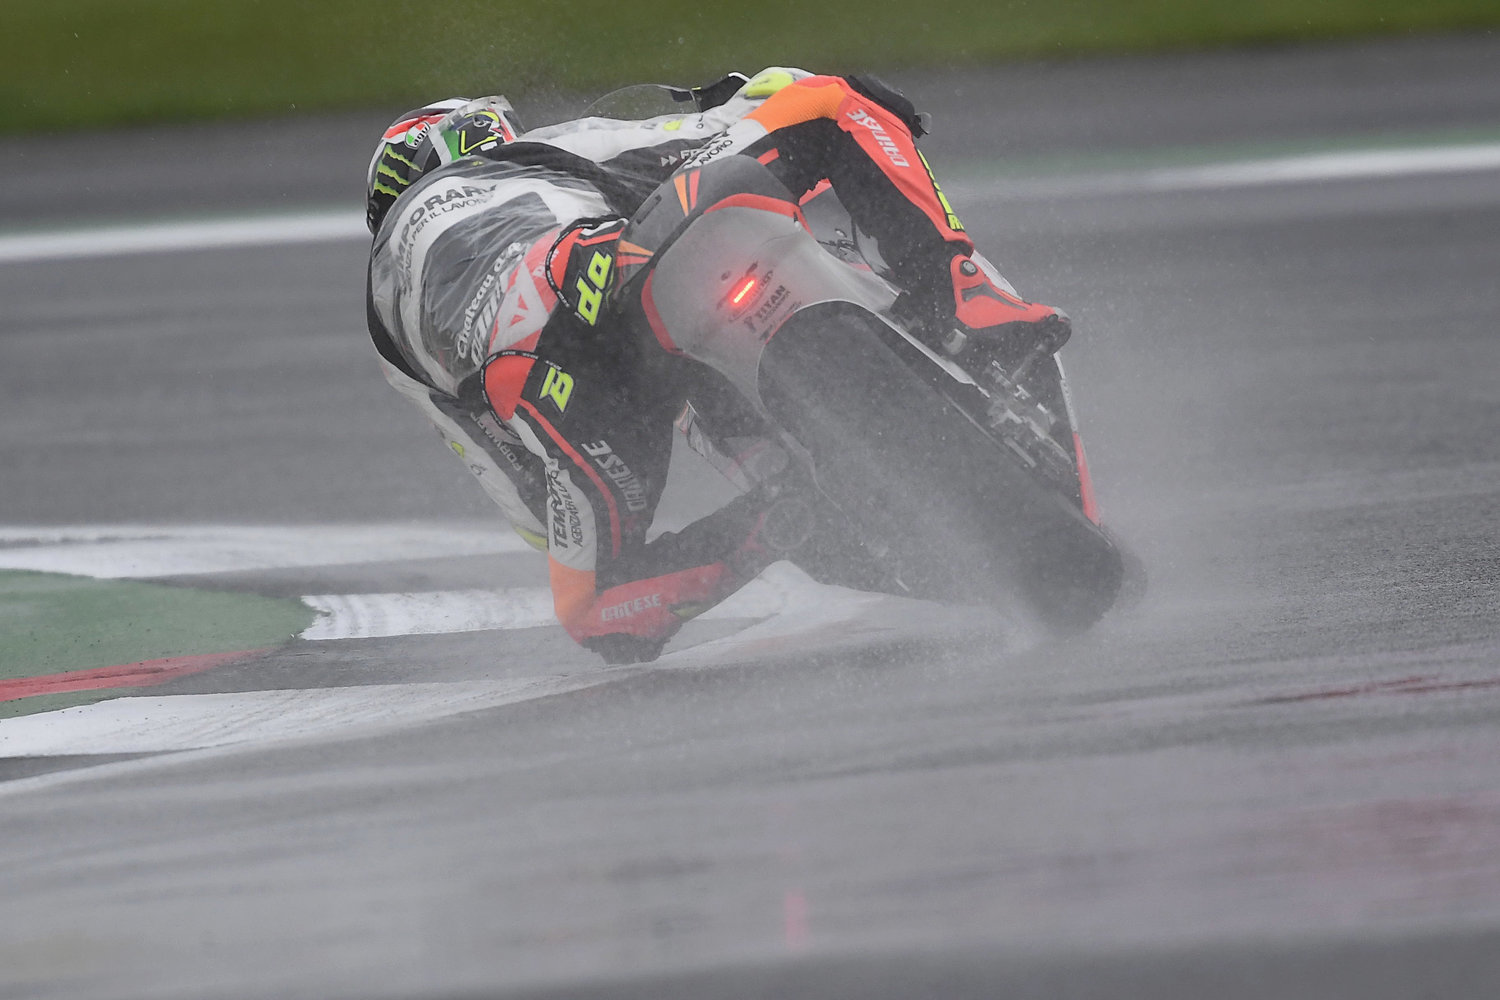 Qualifying under the rain at Silverstone for Forward Racing riders